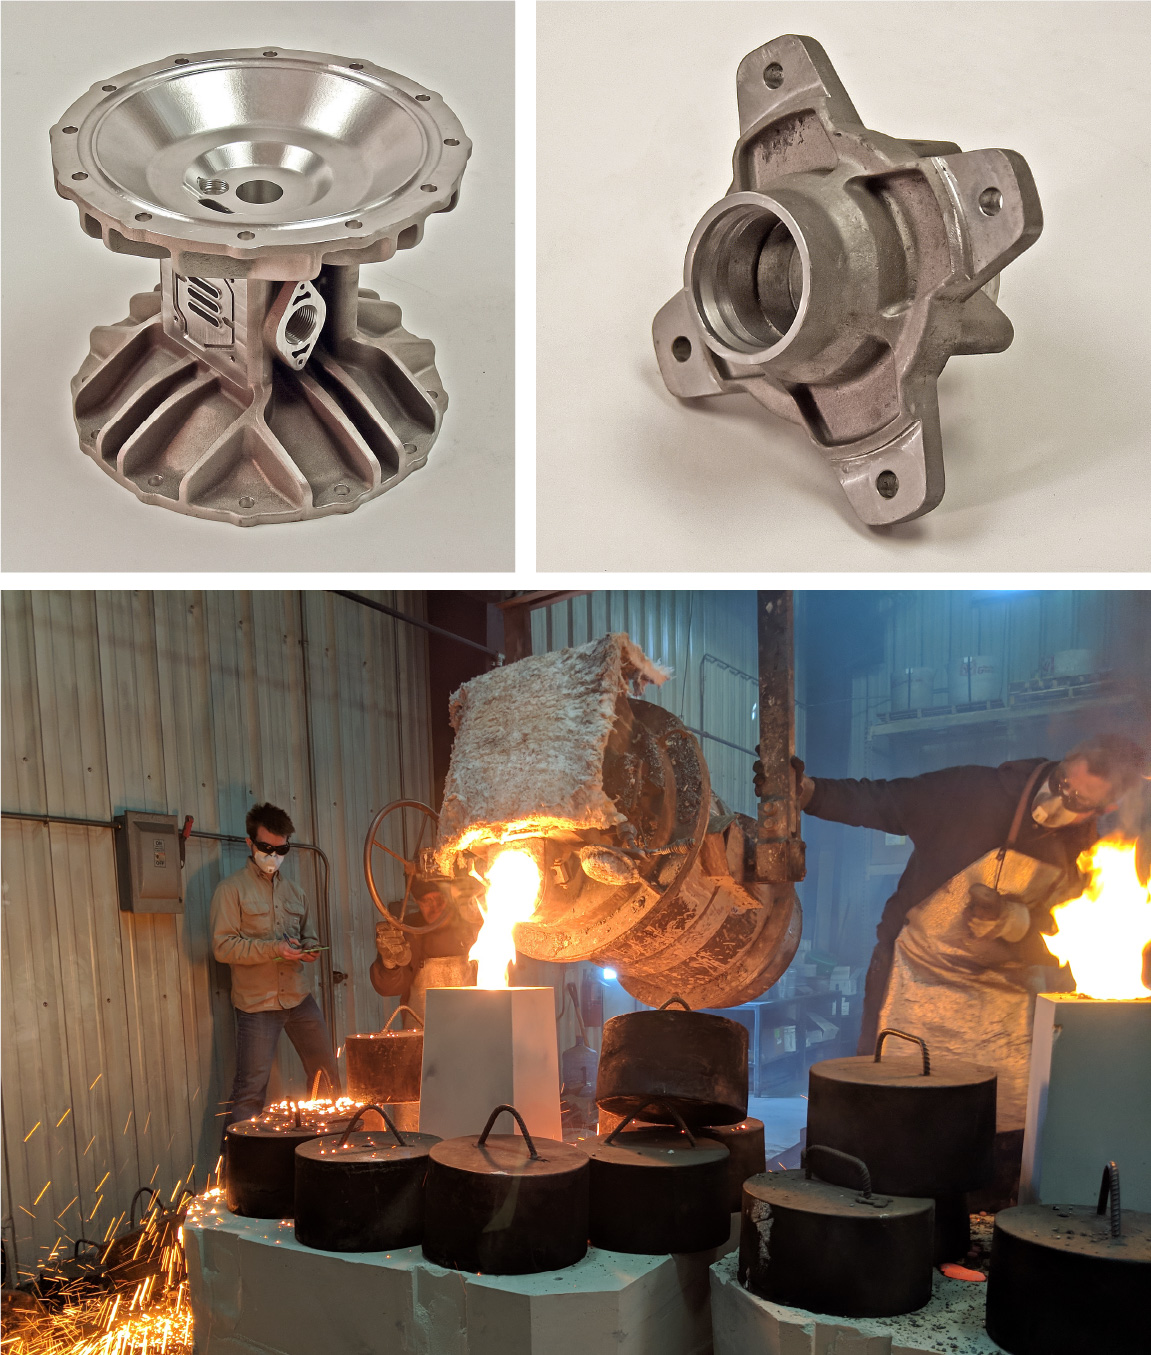 Two of Craft's metal casted products and a machine pouring iron into a mold